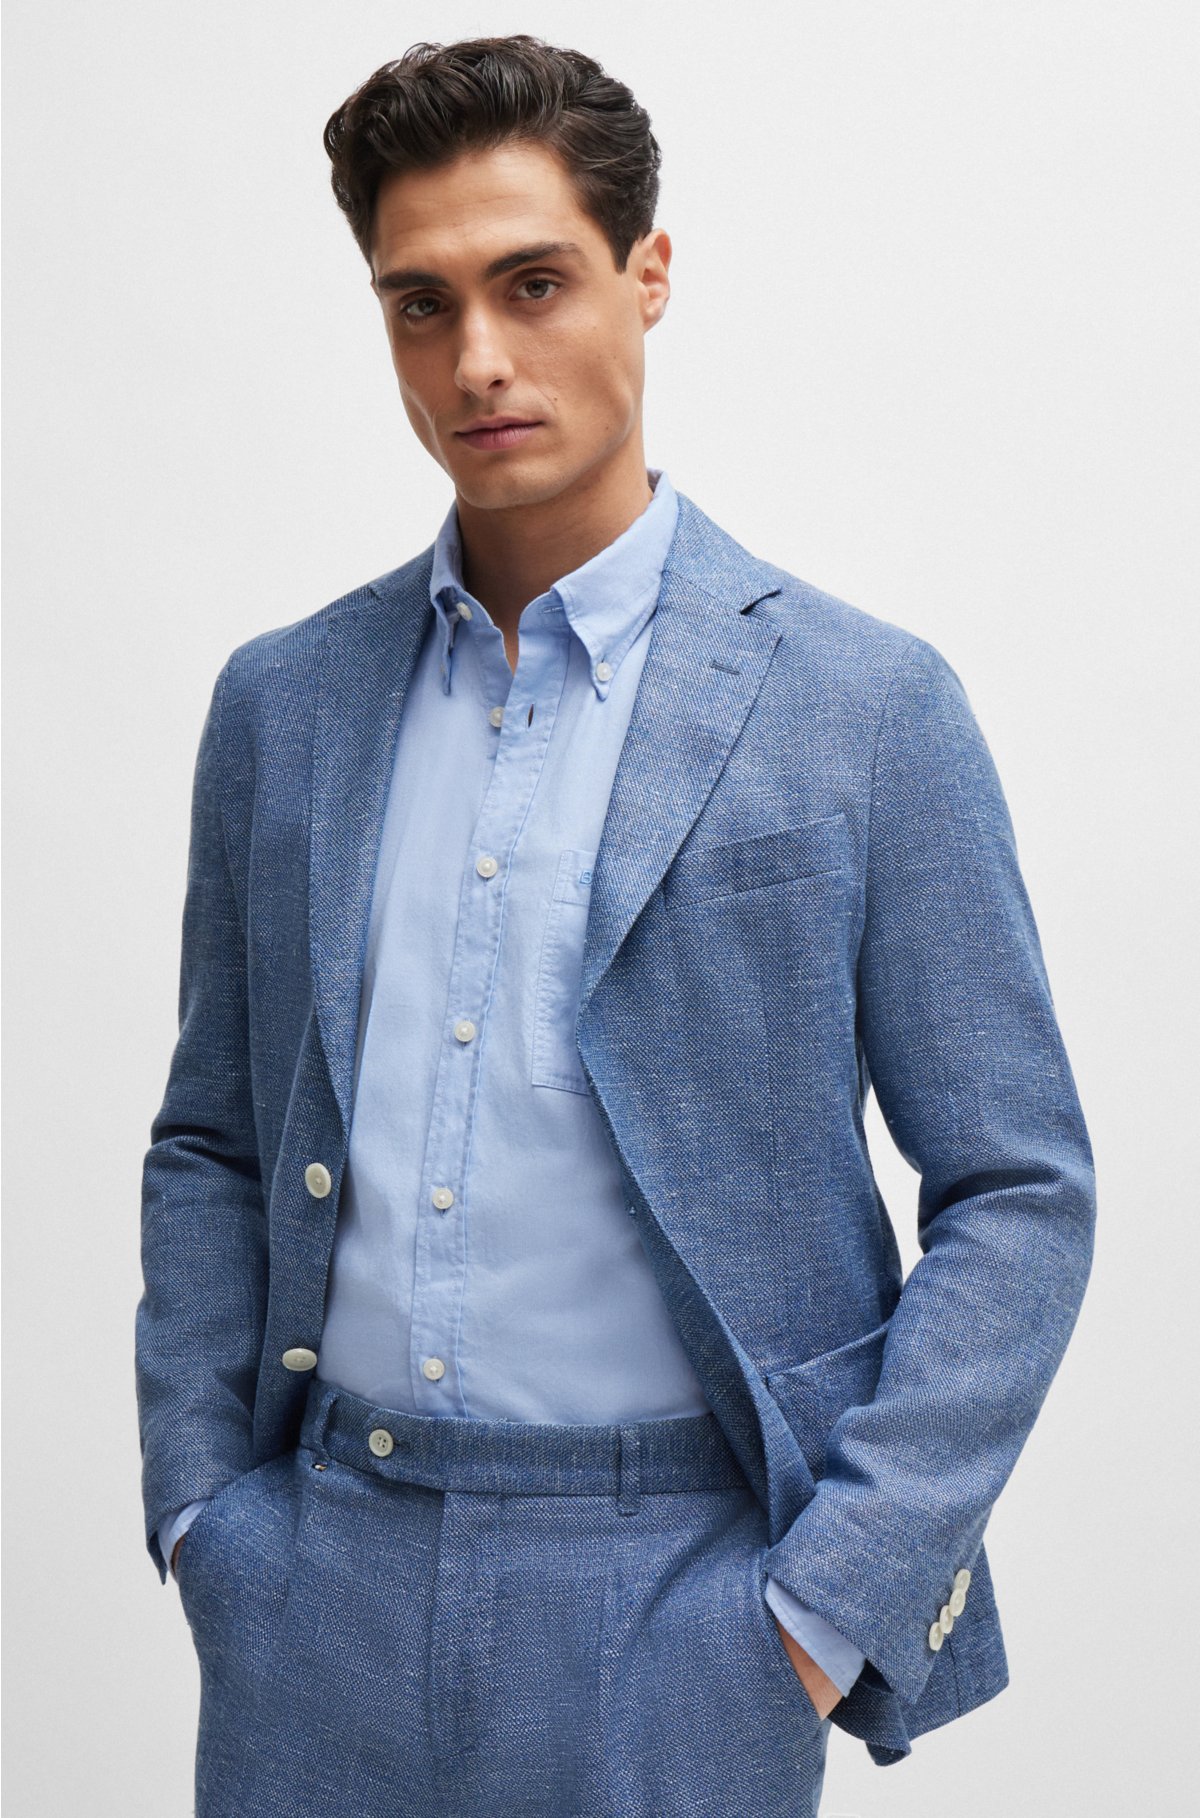 Button-down slim-fit shirt in Oxford cotton, Light Blue